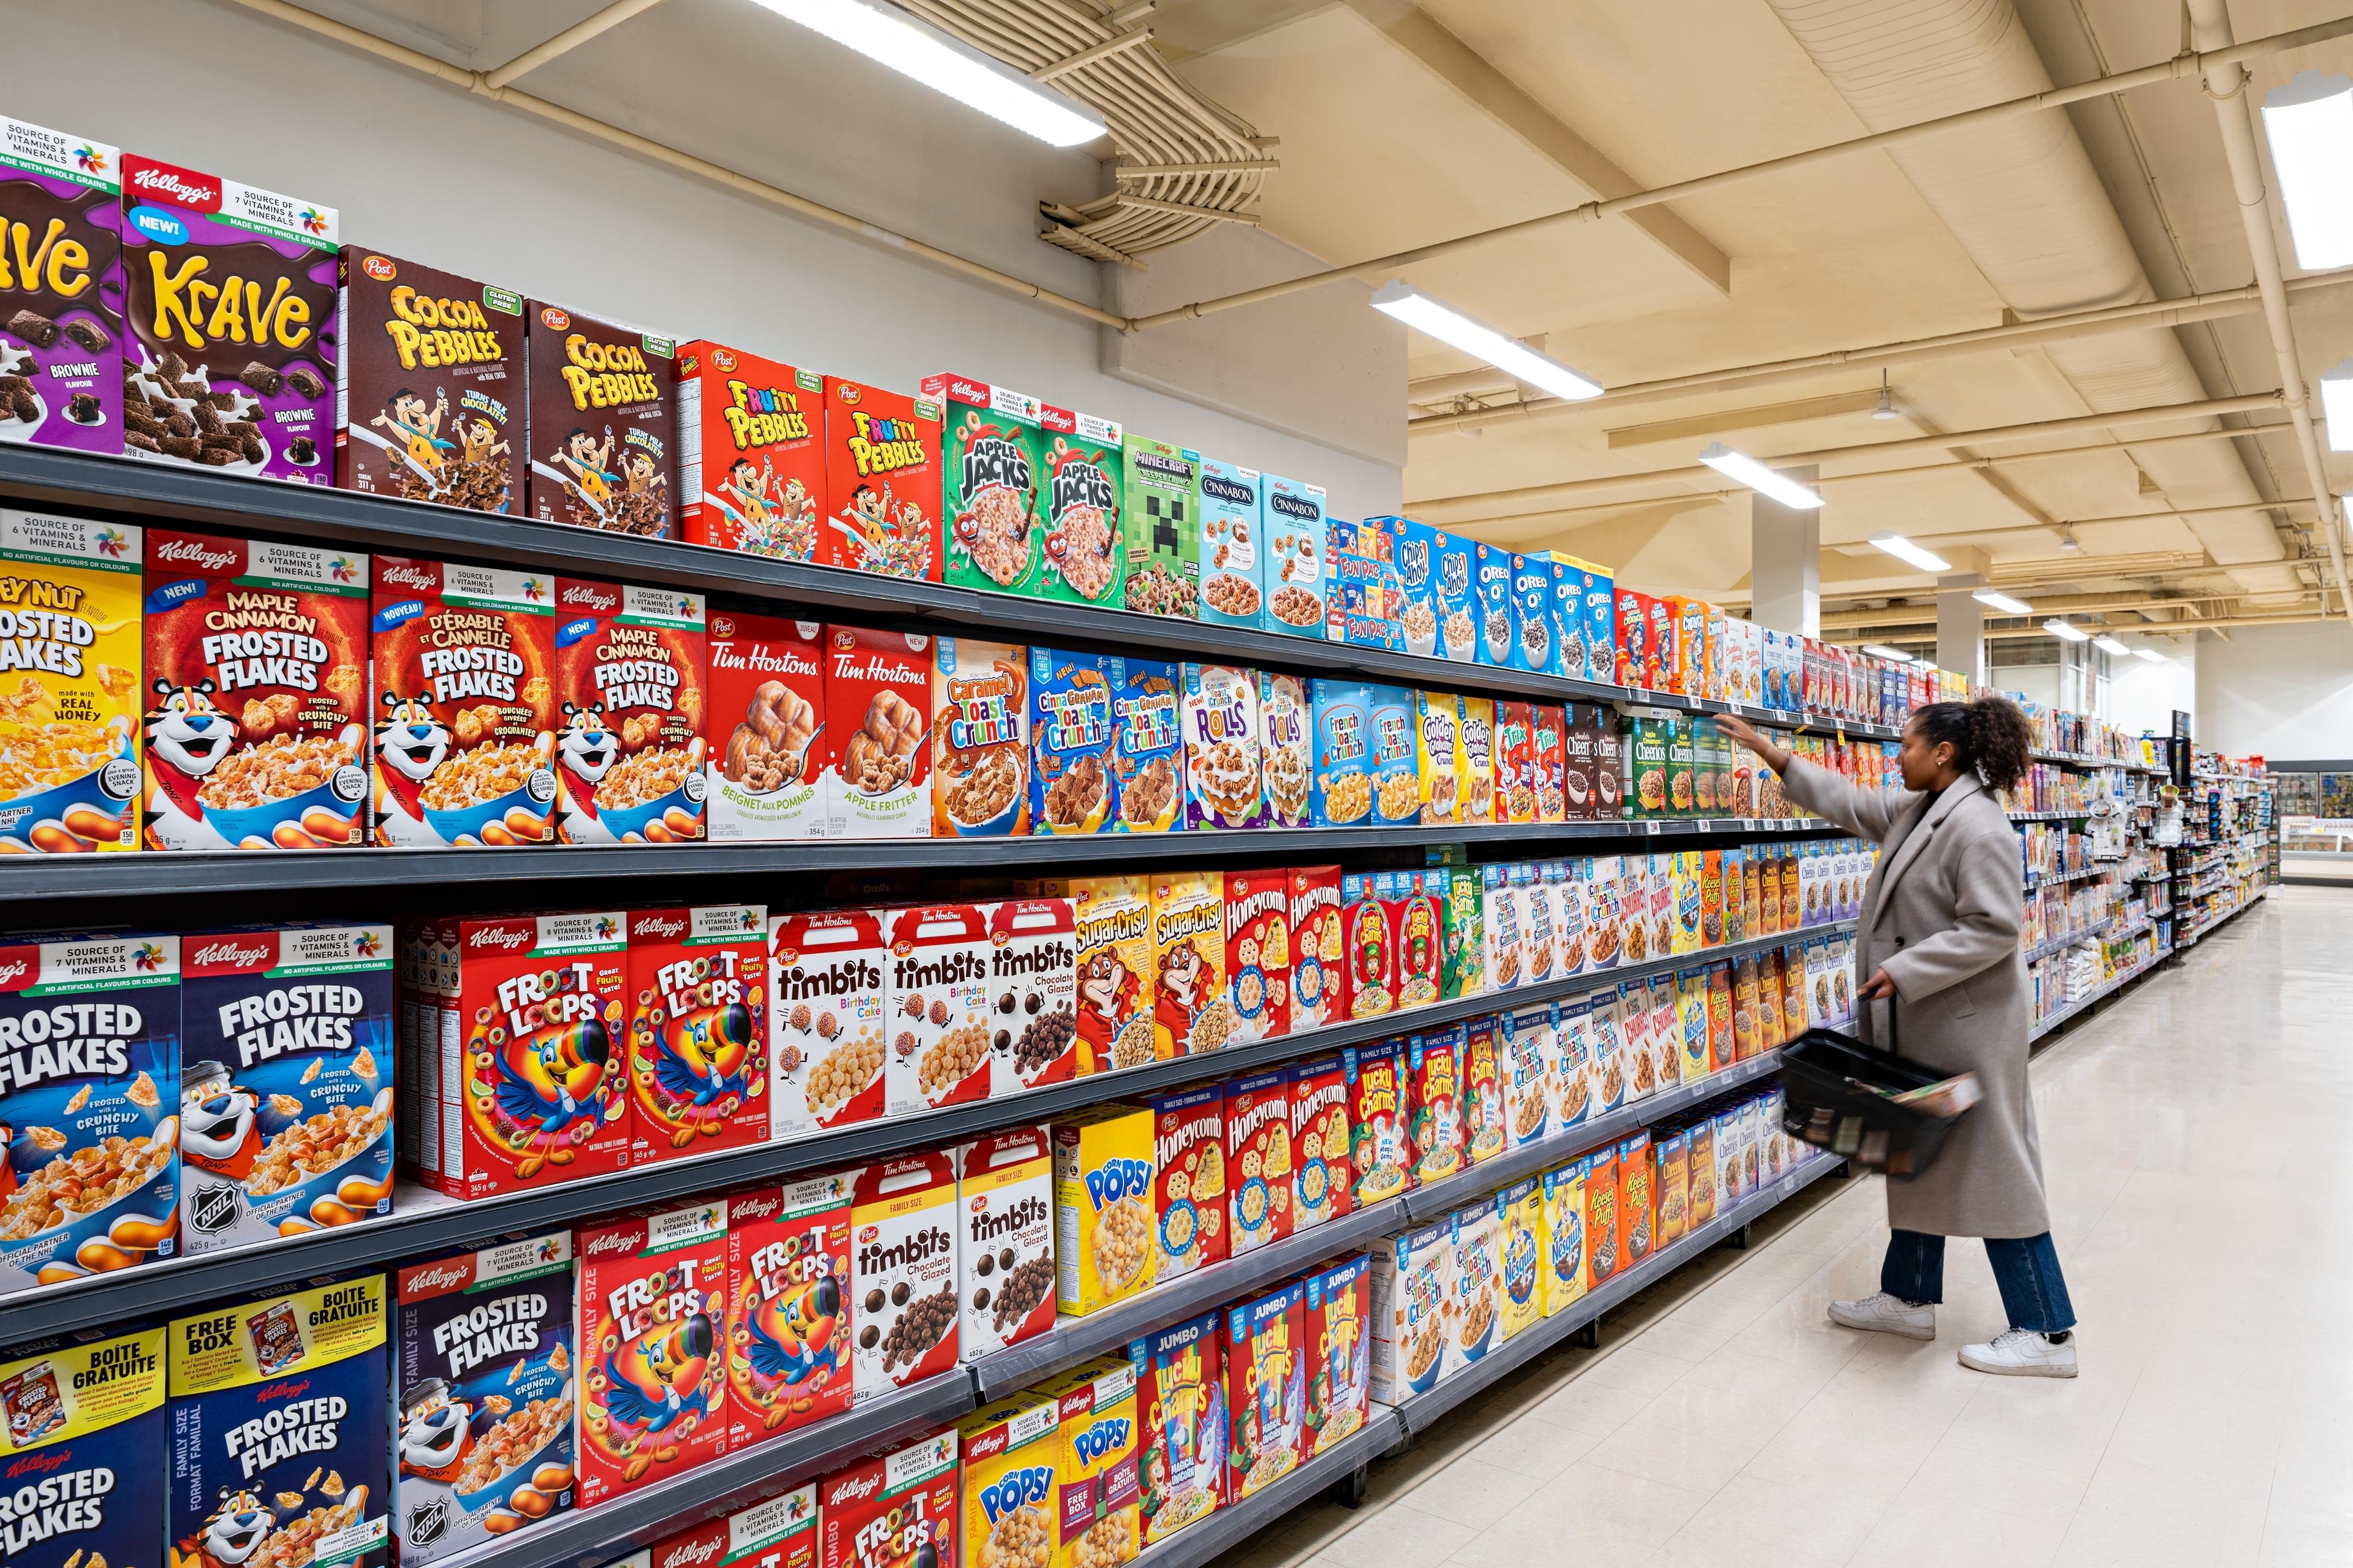 A fully stocked cereal aisle.